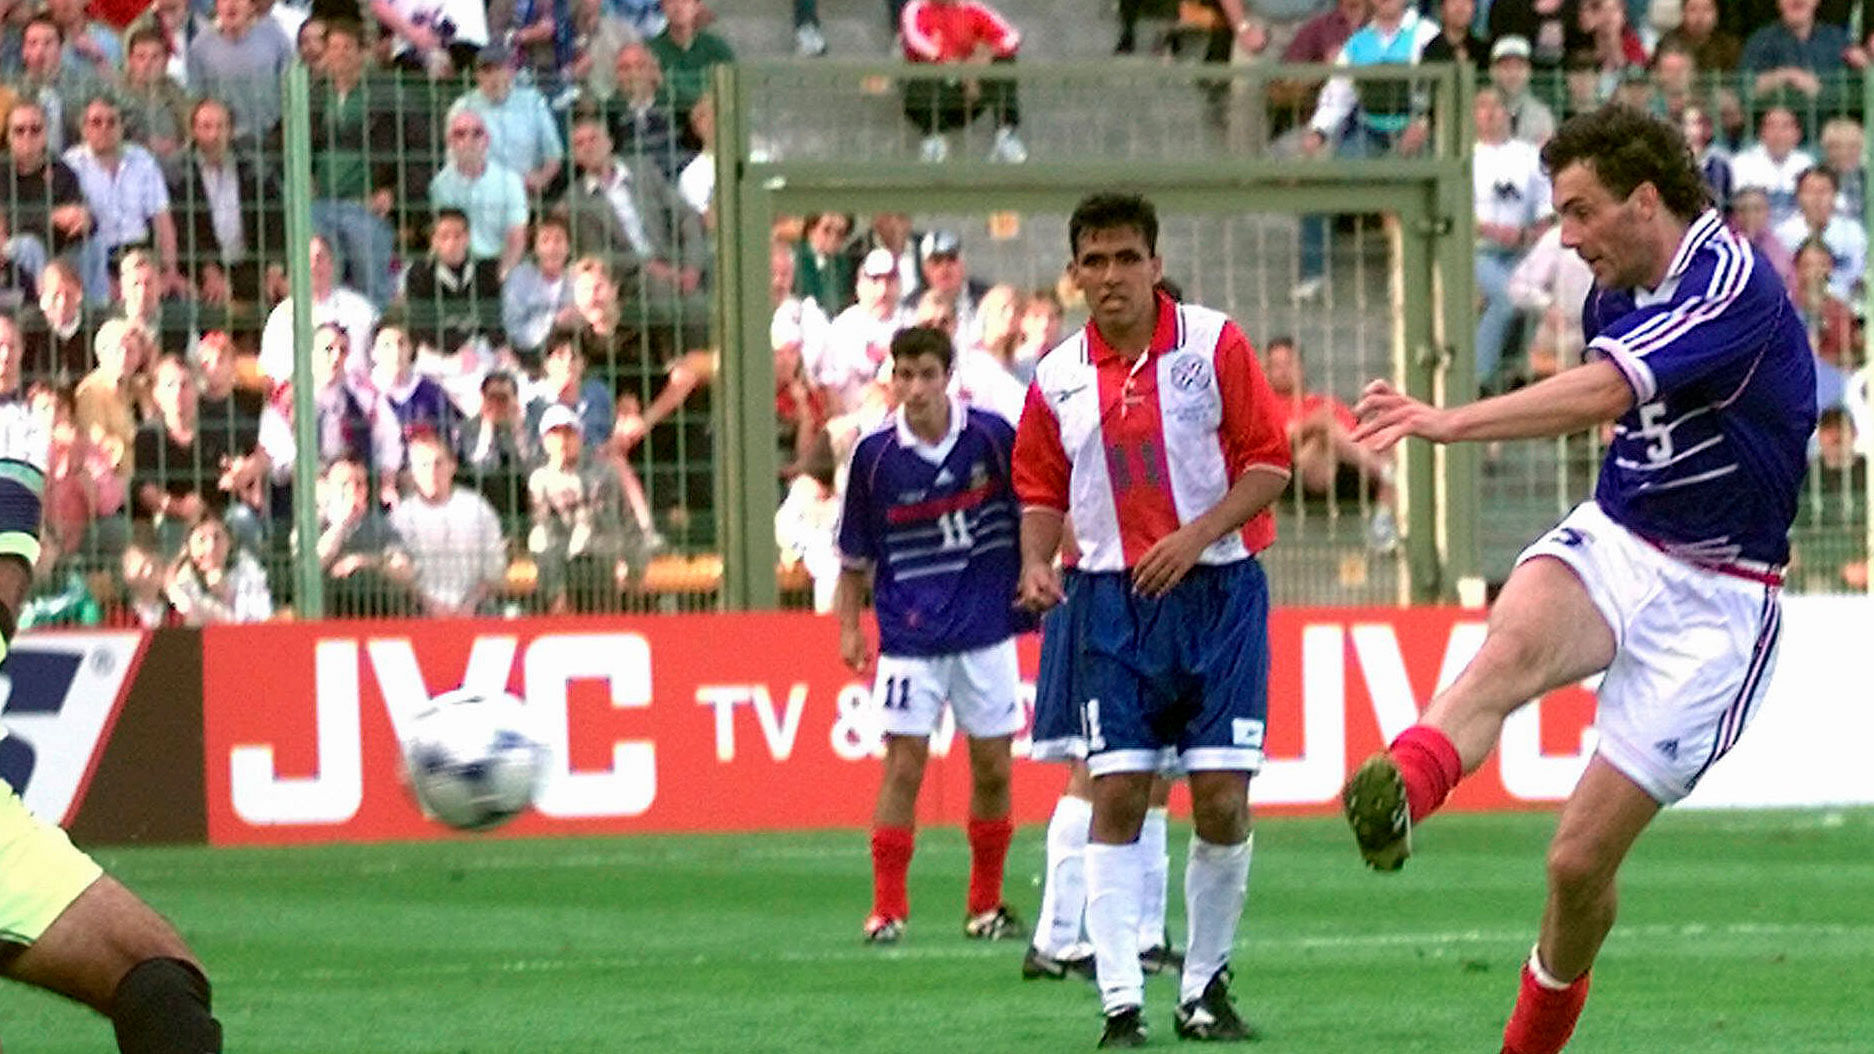 In this Sunday, June 28, 1998 file photo, France’s Laurent Blanc scores against Paraguay in extra time of a round of 16 soccer match at the World Cup at the Felix Bollaert stadium in Lens, France. Blanc’s strike was the first “golden goal” in World Cup finals history to give France a 1-0 win over Paraguay.&nbsp;